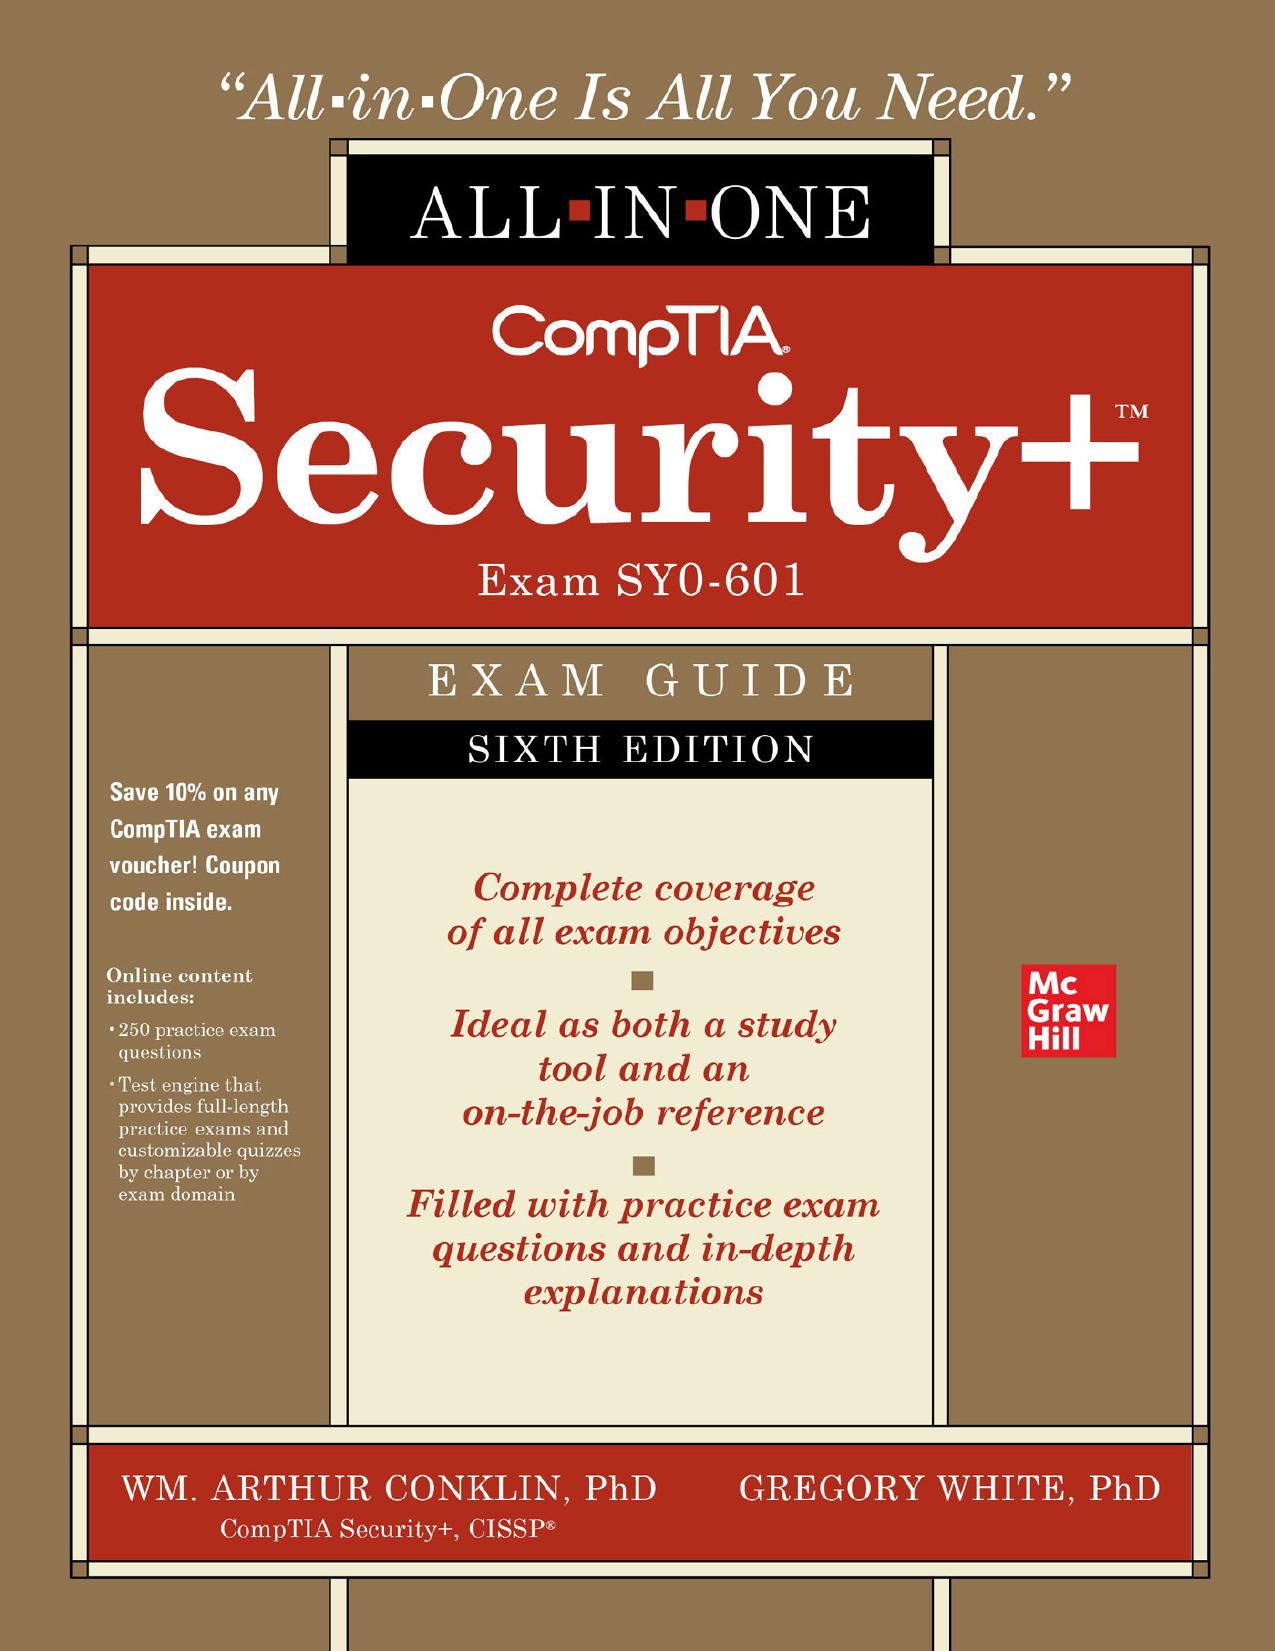 CompTIA Security+ All-in-One Exam Guide (Exam SY0-601)) by Wm. Arthur Conklin